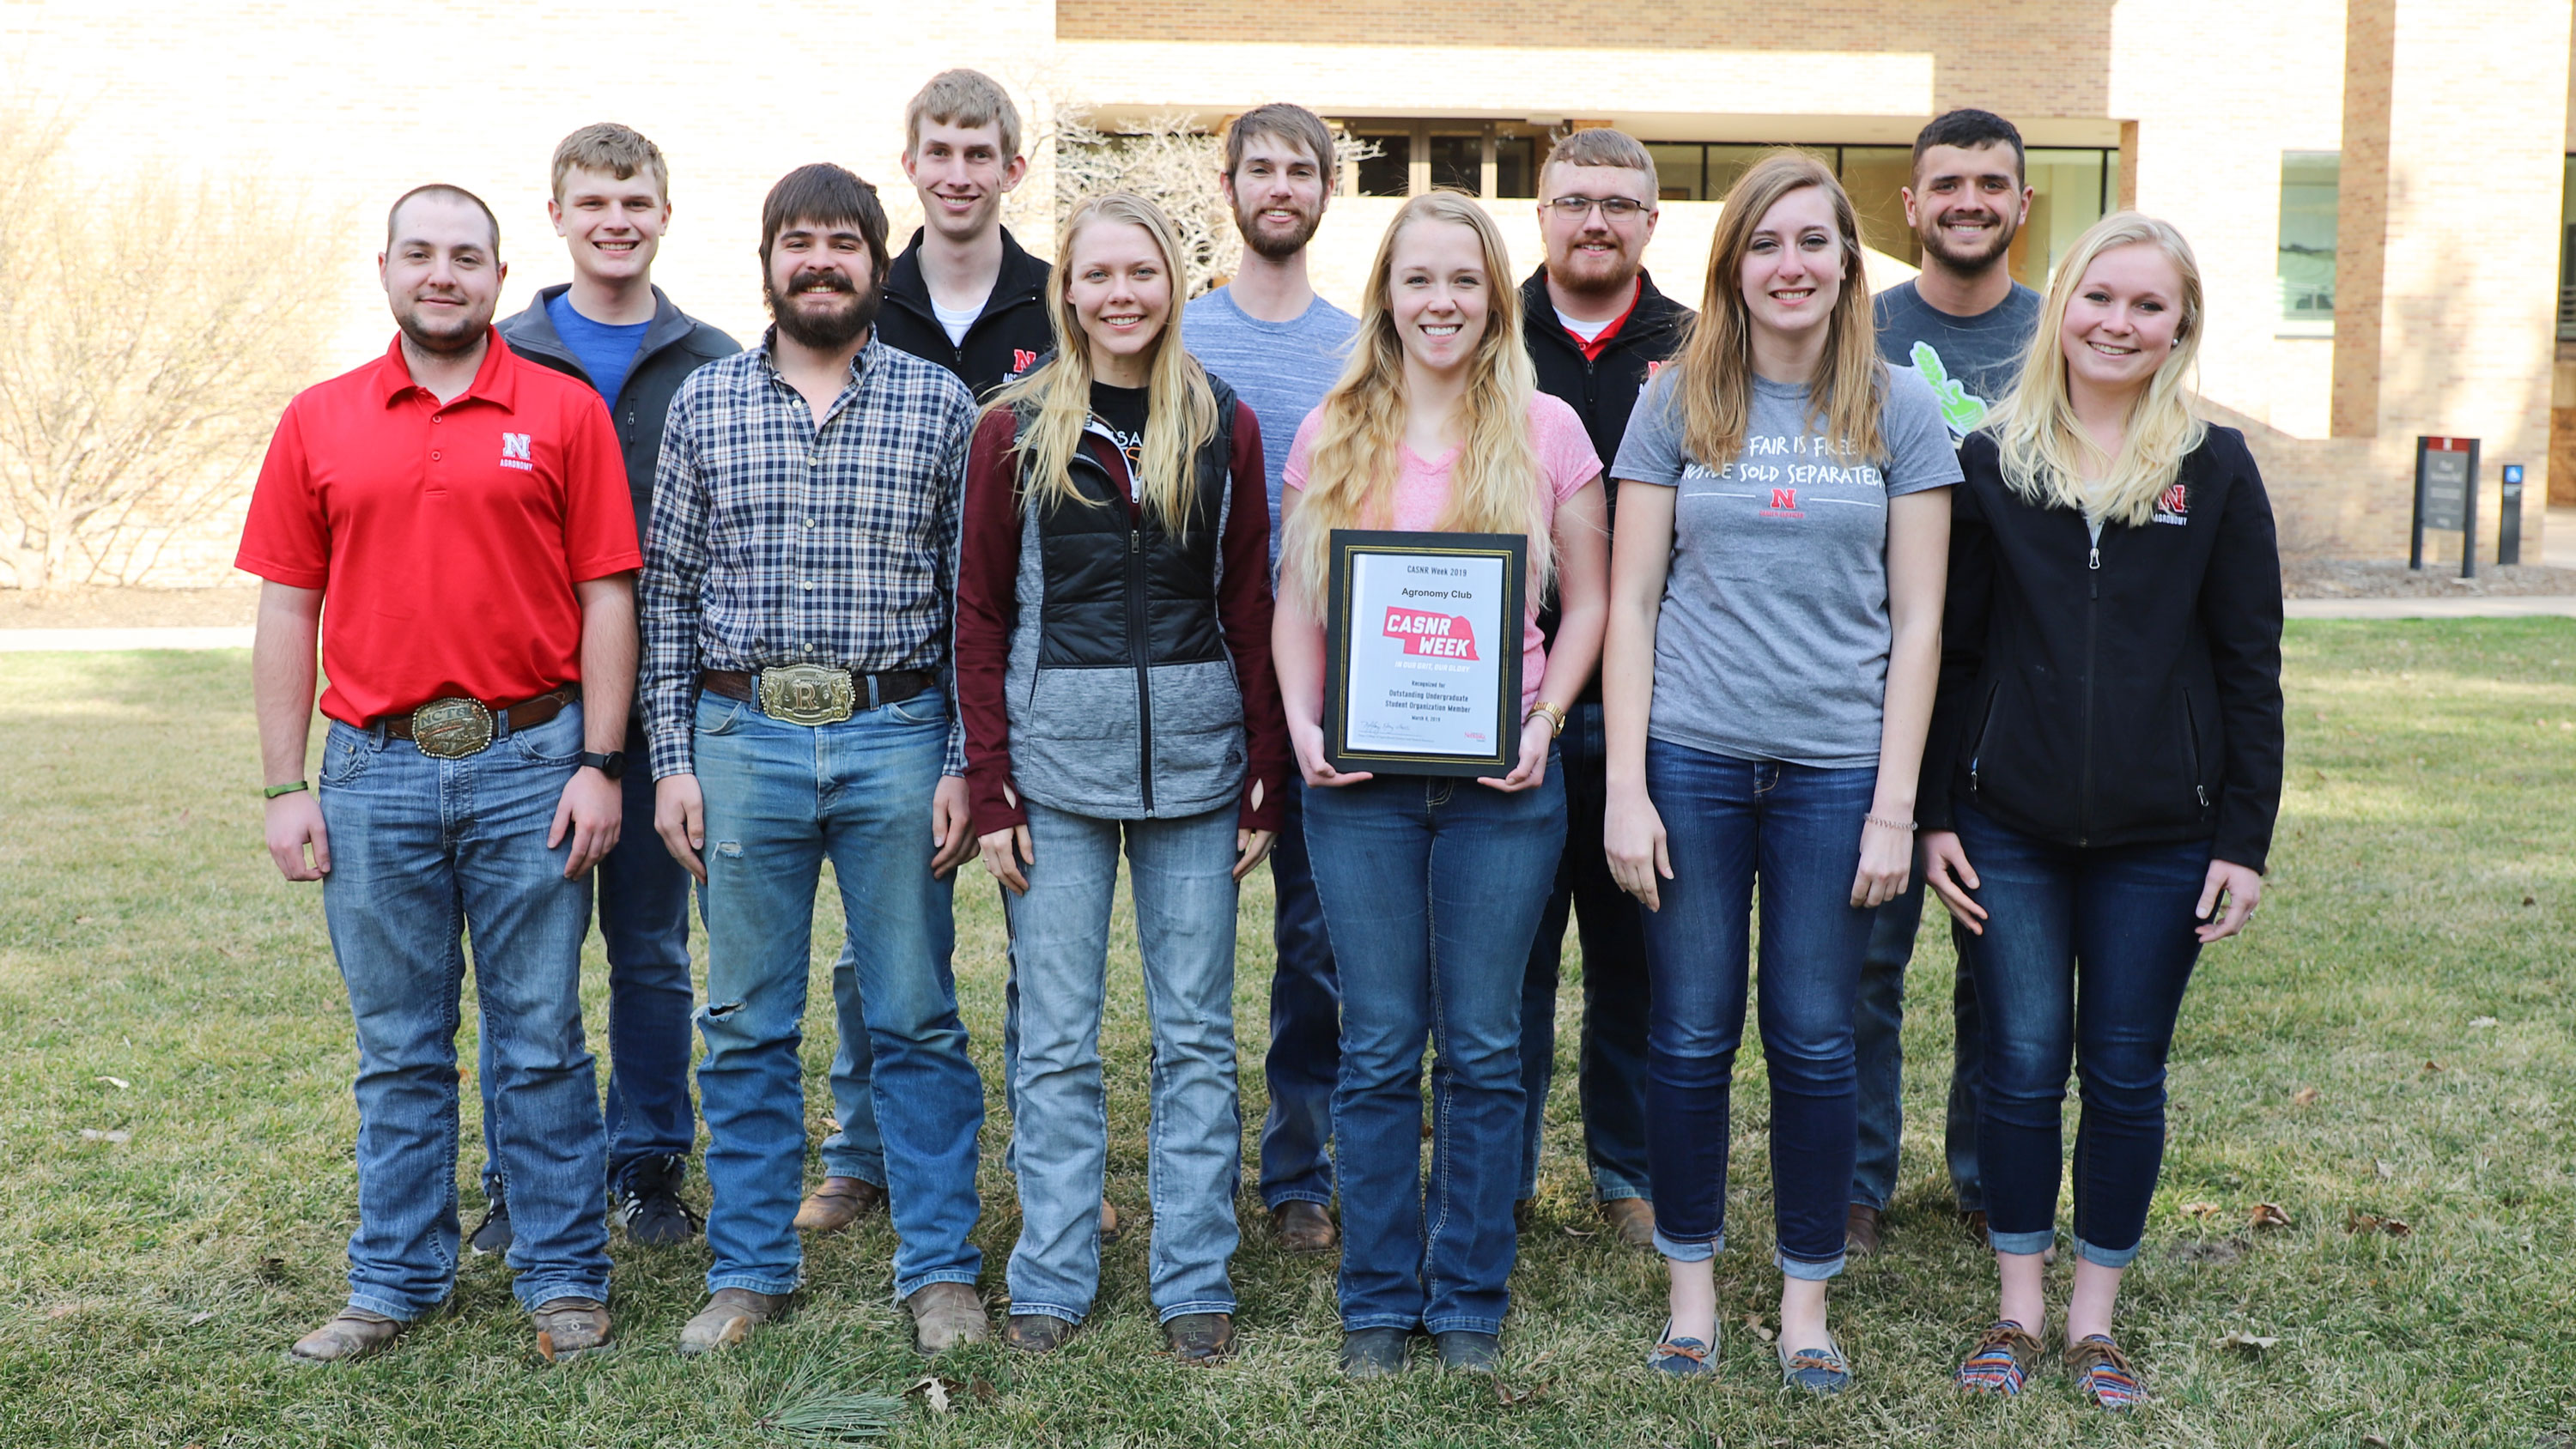 Agronomy Club members include Jared Stander (back row, from left), Chad Lammers, Kolby Grint, Alex Baumert, Jake Krings, Dalton Johnson (front row, from left), Rodger Farr, Michaela Cunningham, Rebecca McKay, Samantha Teten and Moriah Heerten.